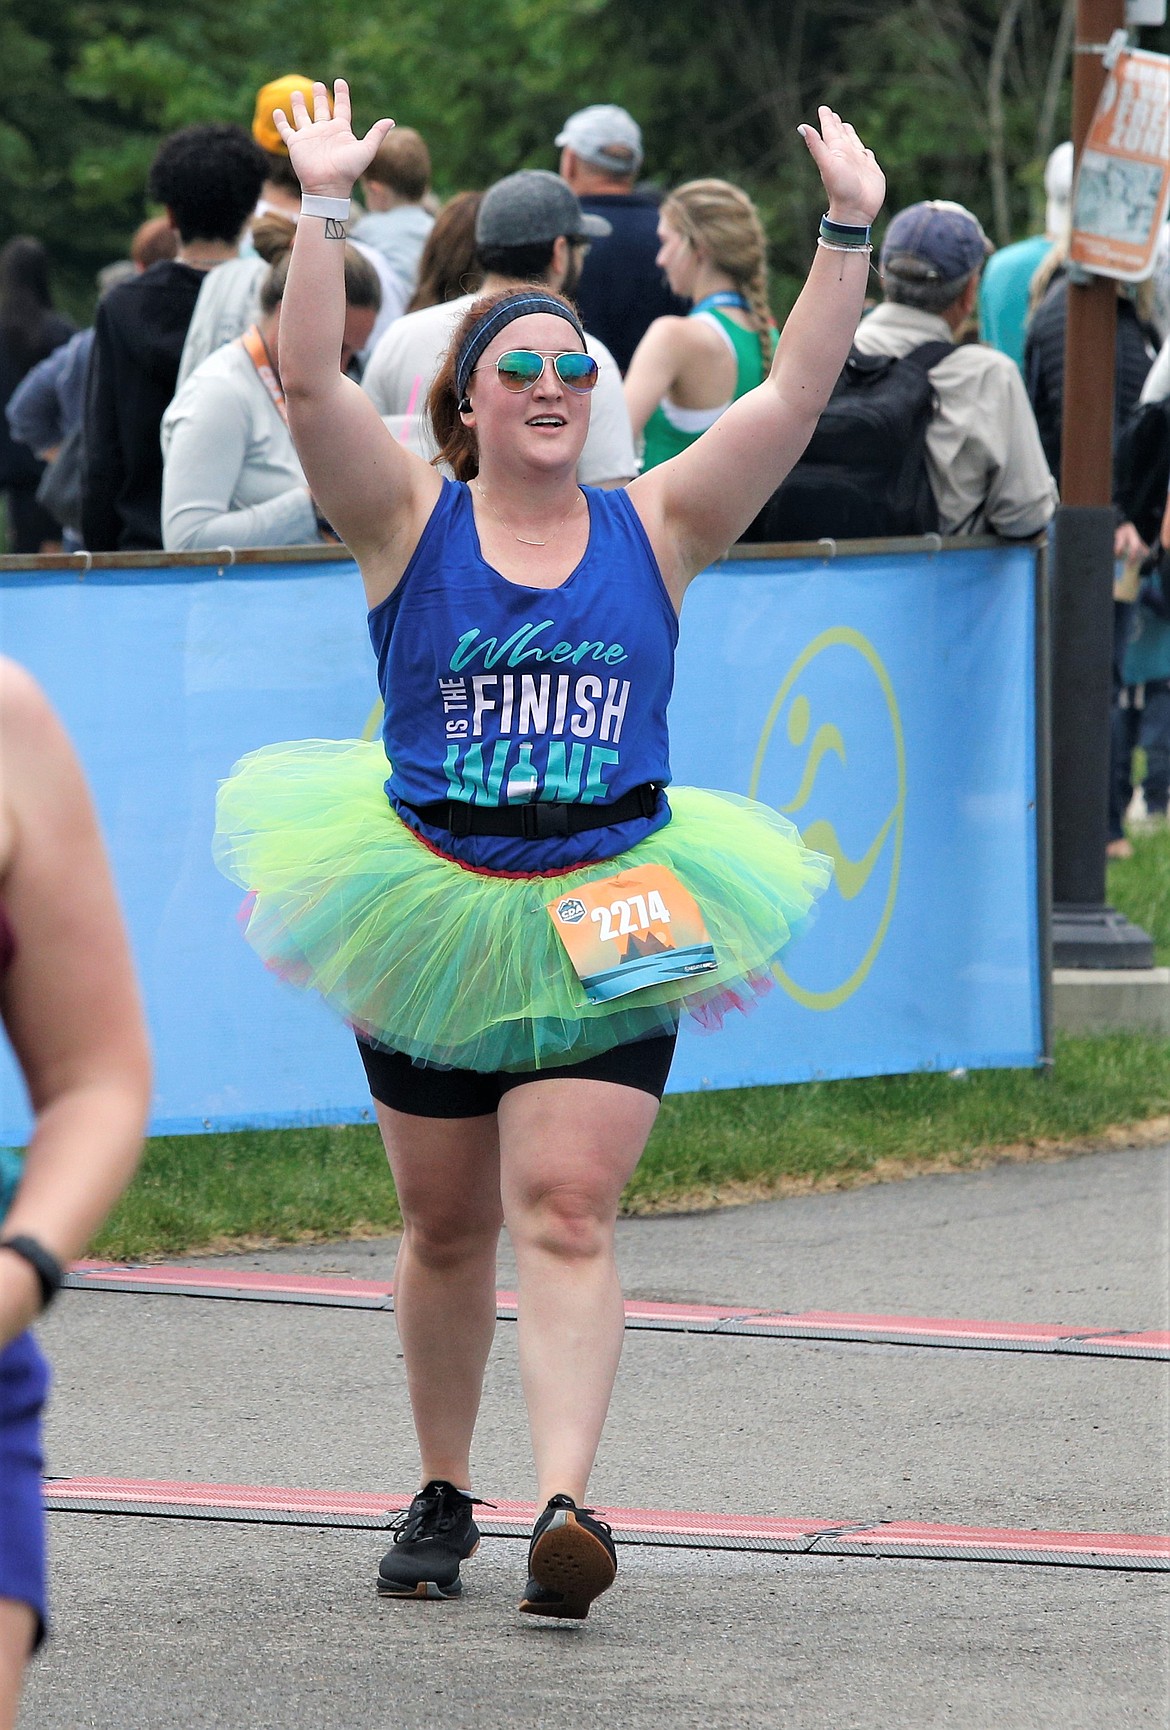 Kristian Enghusen of Spokane raises her arms in triumph at the finish line of the 5K at McEuen Park on Sunday.